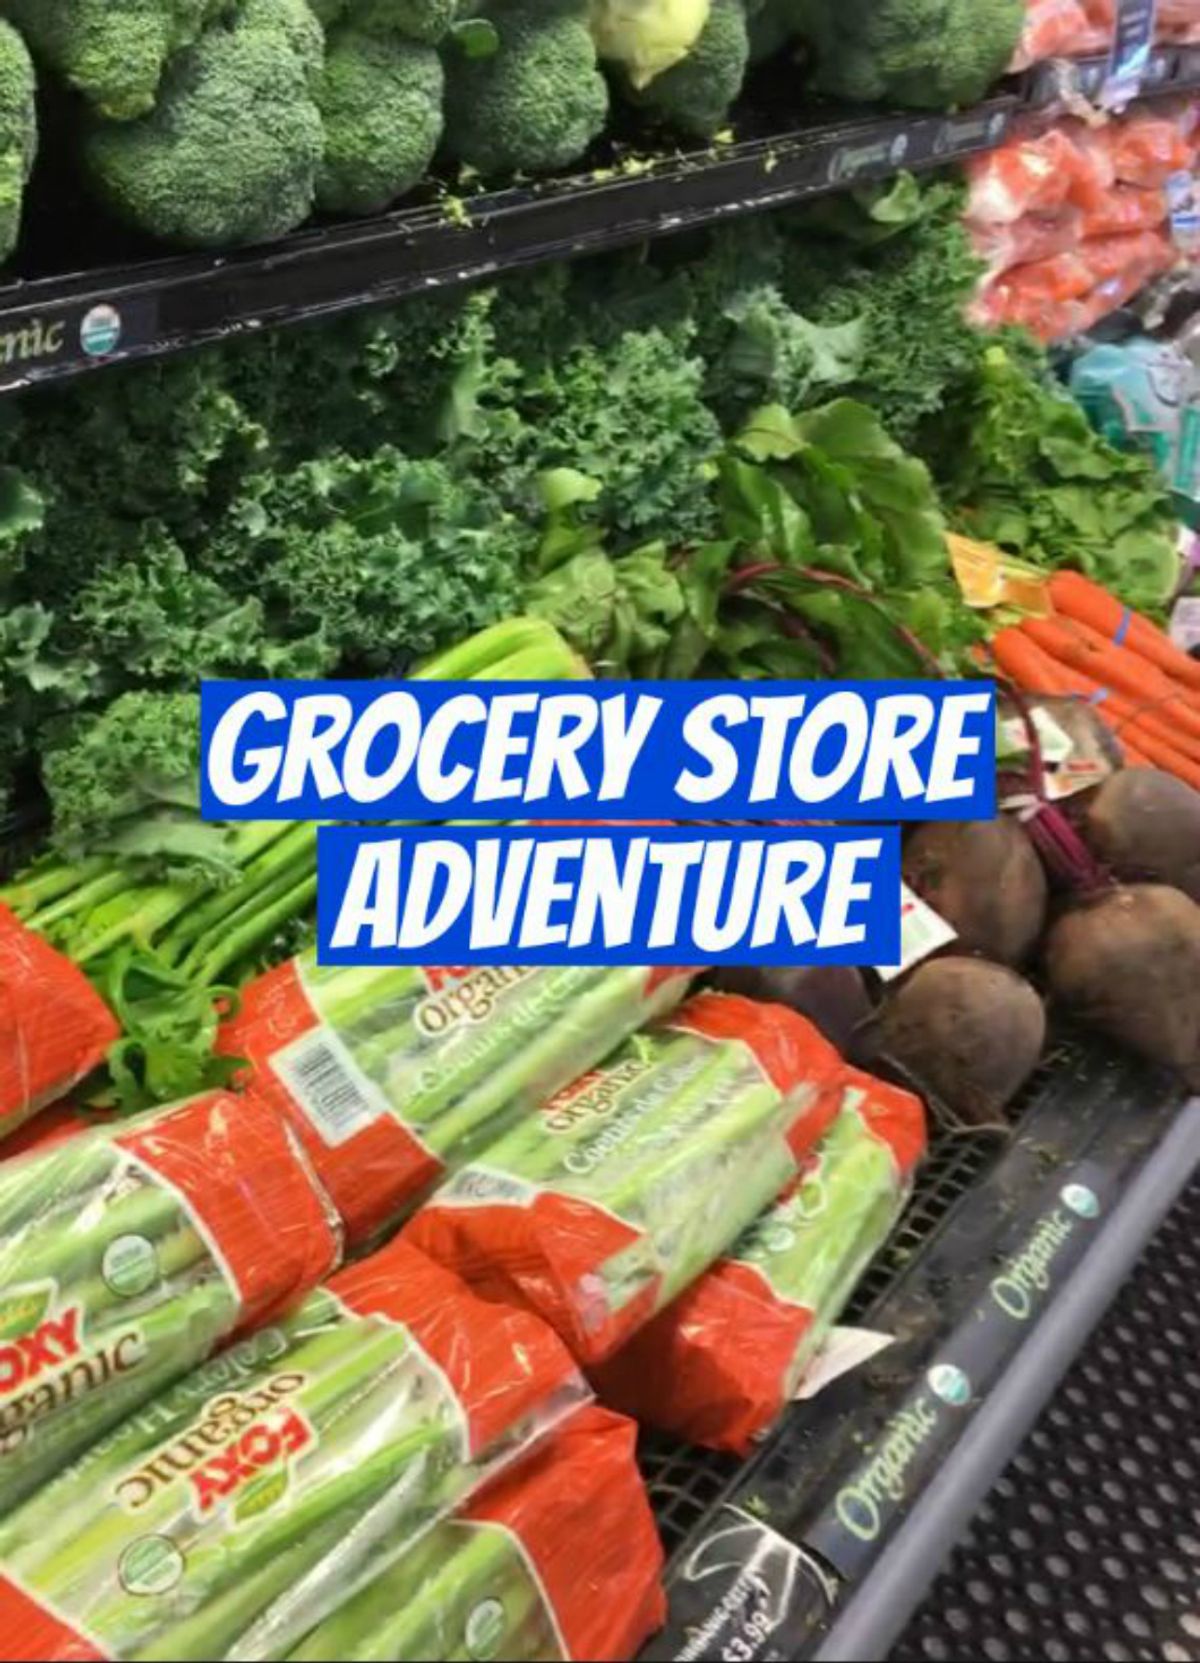 A Grocery Store Adventure